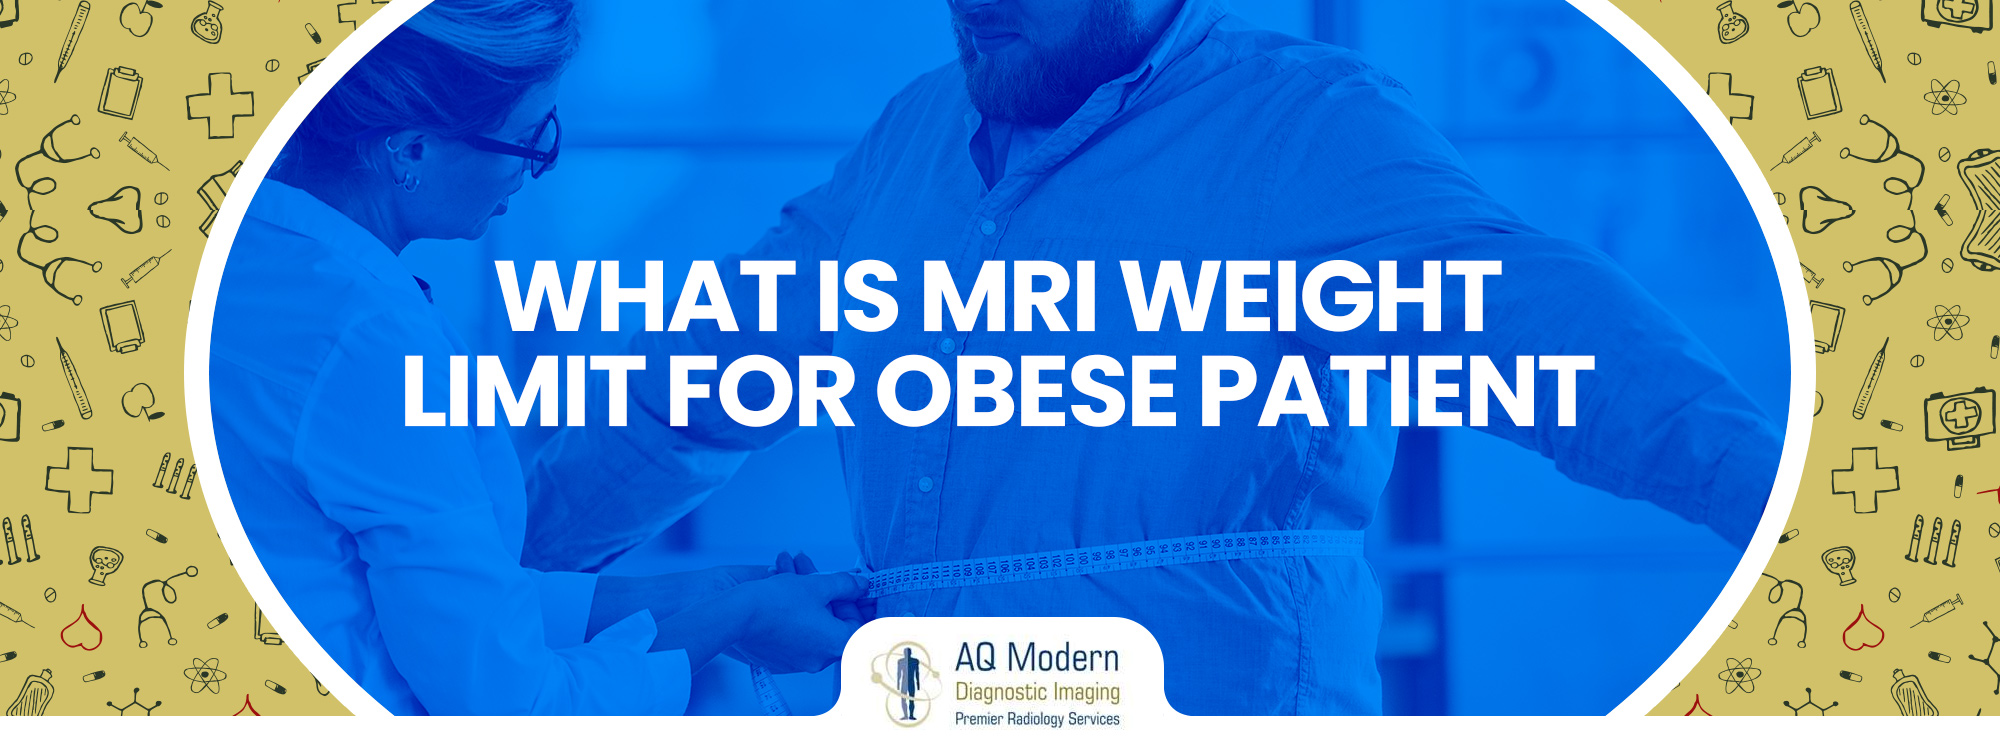 mri weight limit for obese patient